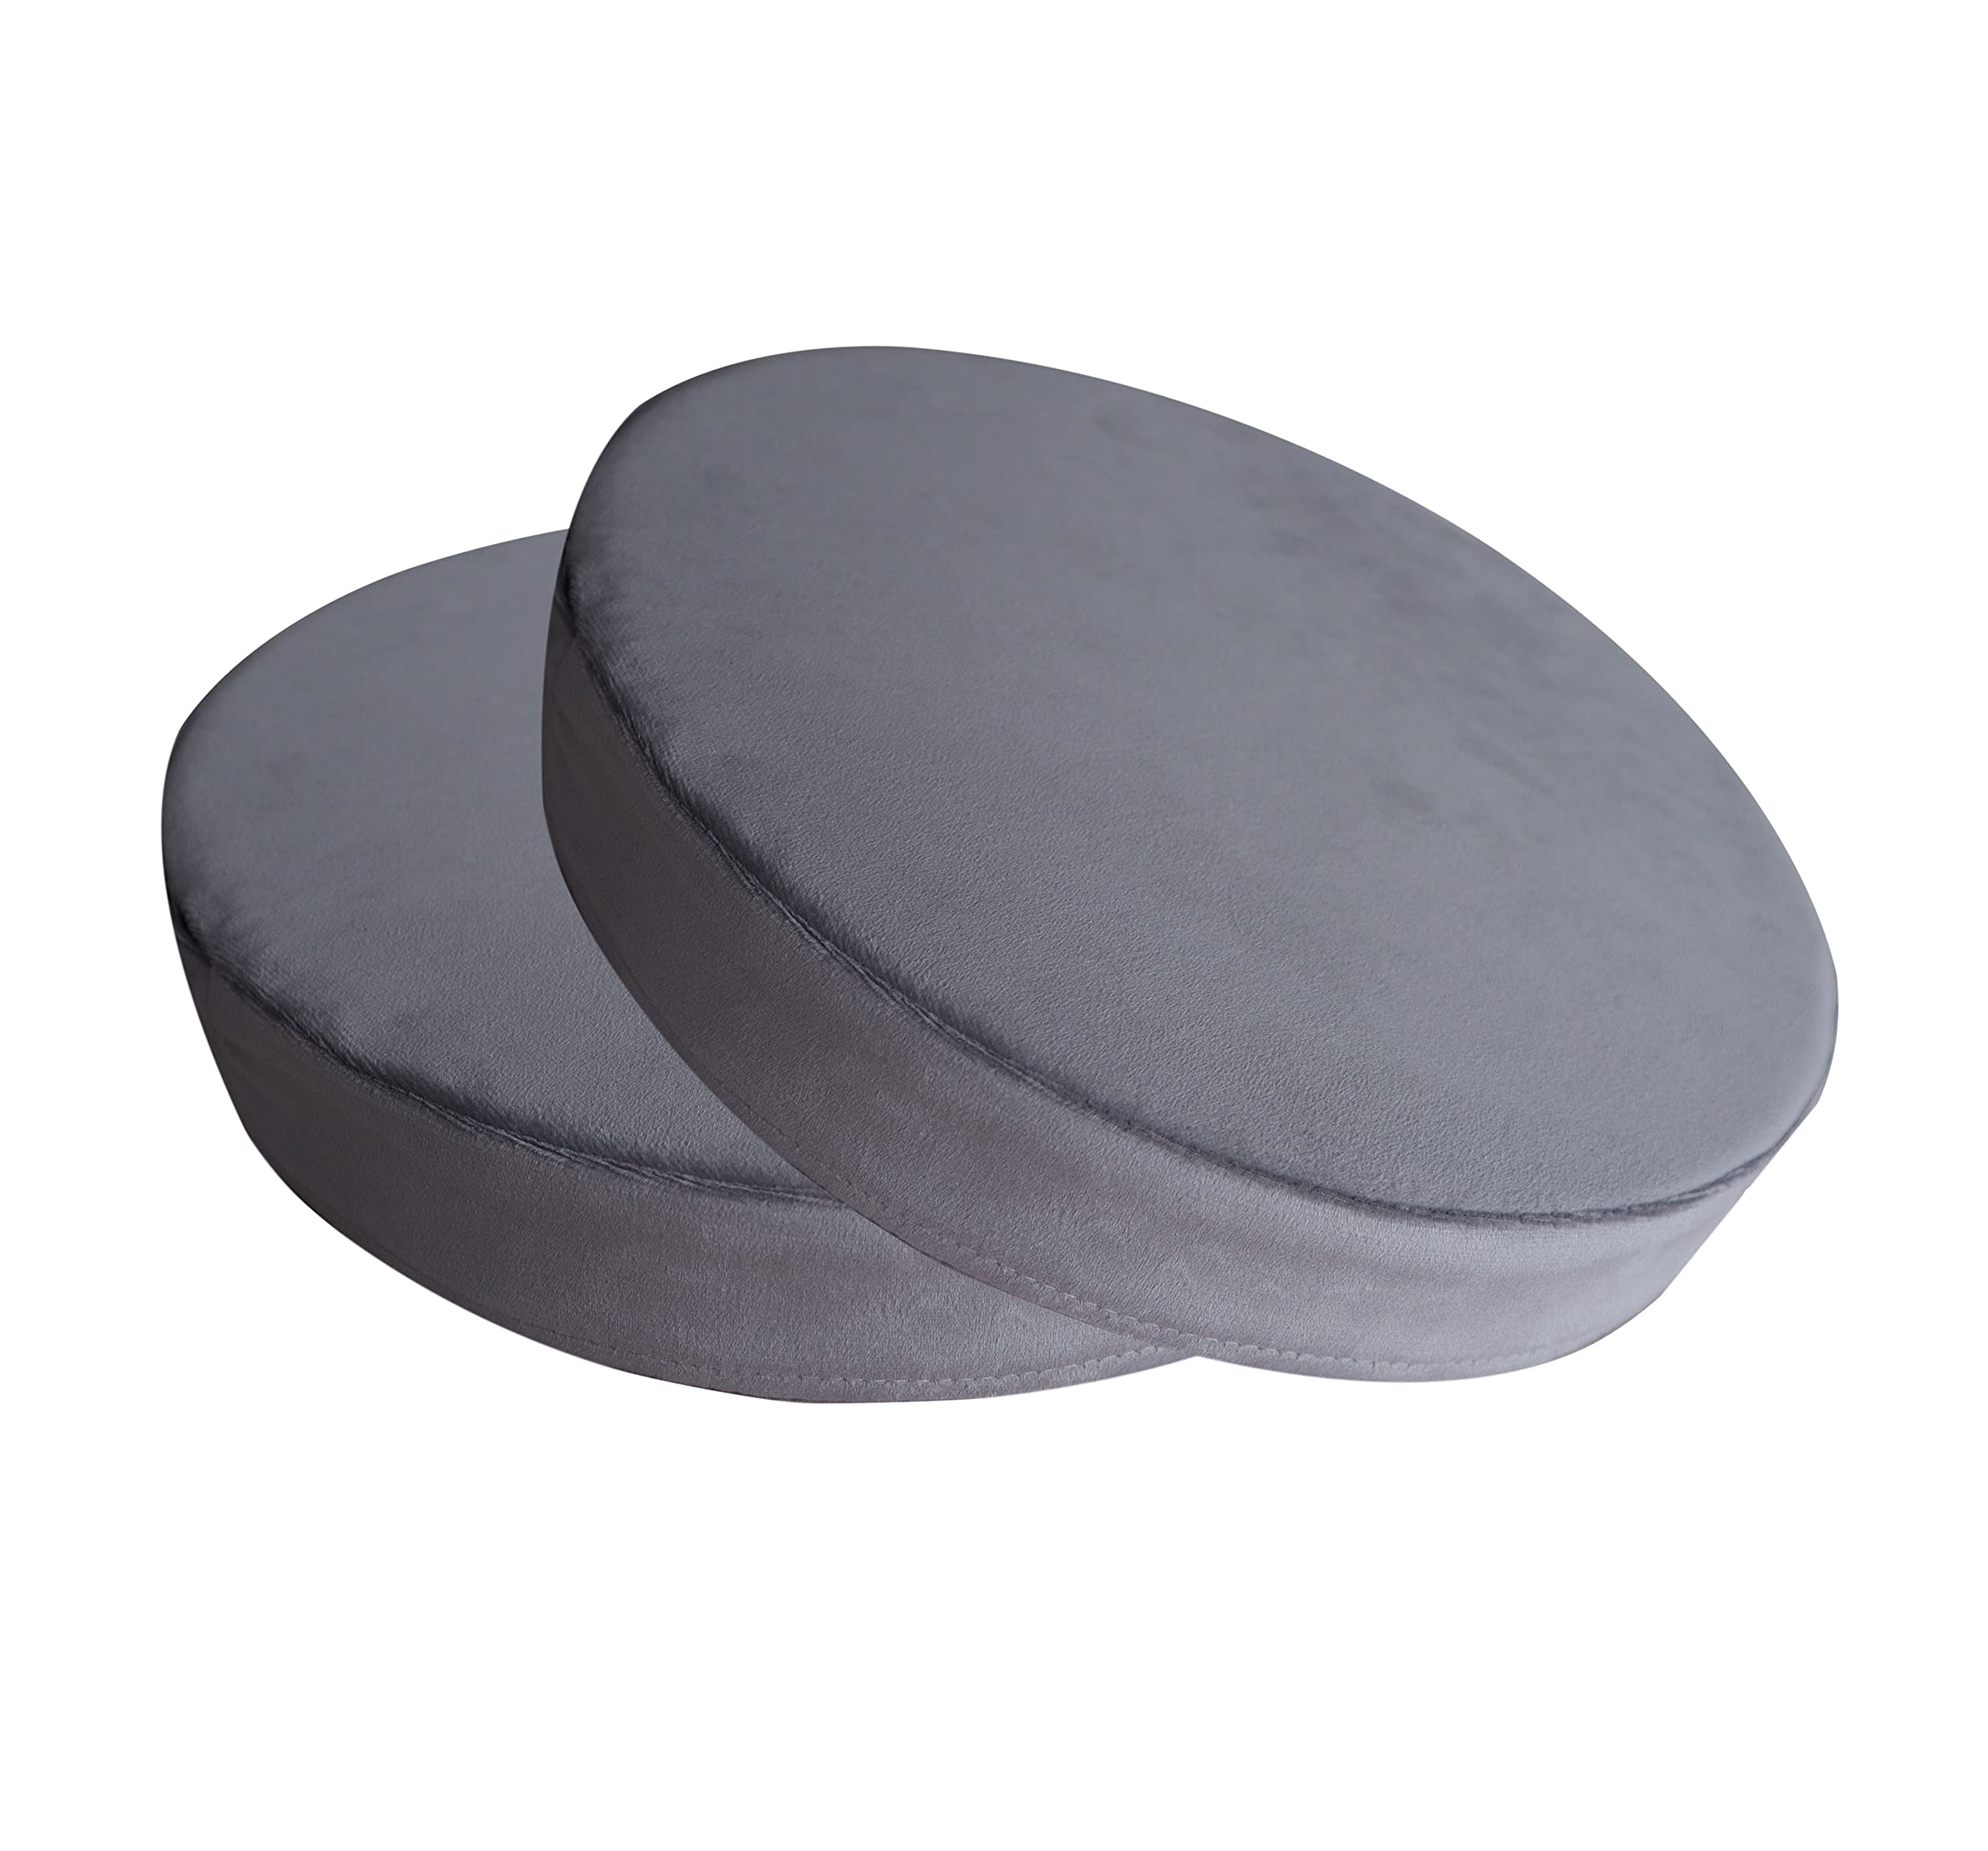 Frabury 2 Pack Round Plush Velvet Seat Cushions Office Kitchen Dining Chair Cushions Pads 14x2 Inch (Light Gray)